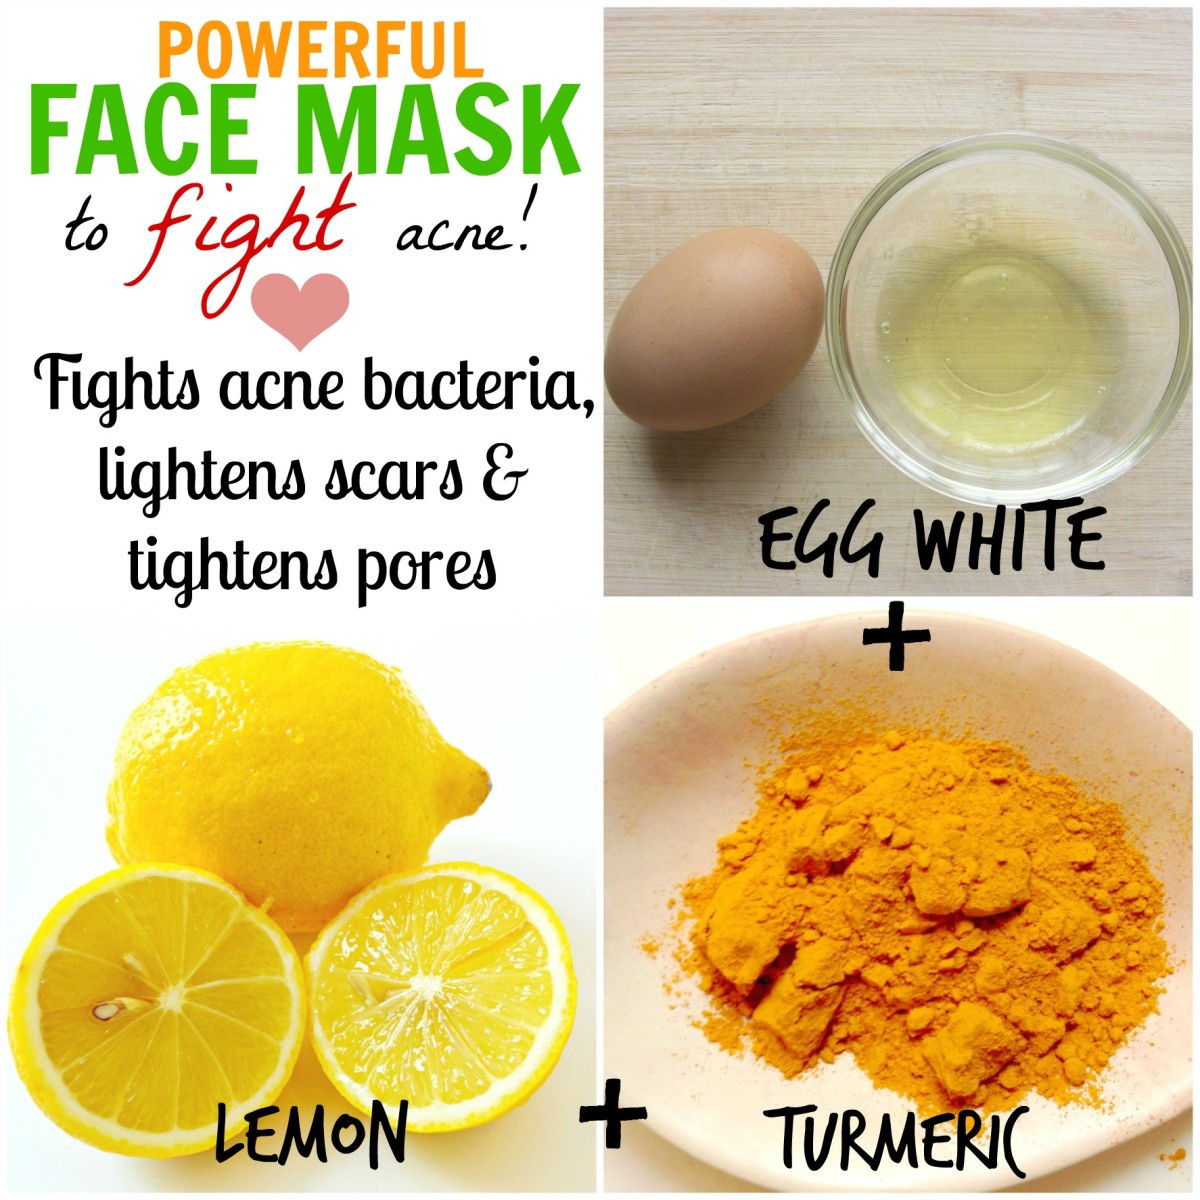 Acne Masks DIY
 DIY Homemade Face Masks for Acne How to Stop Pimples